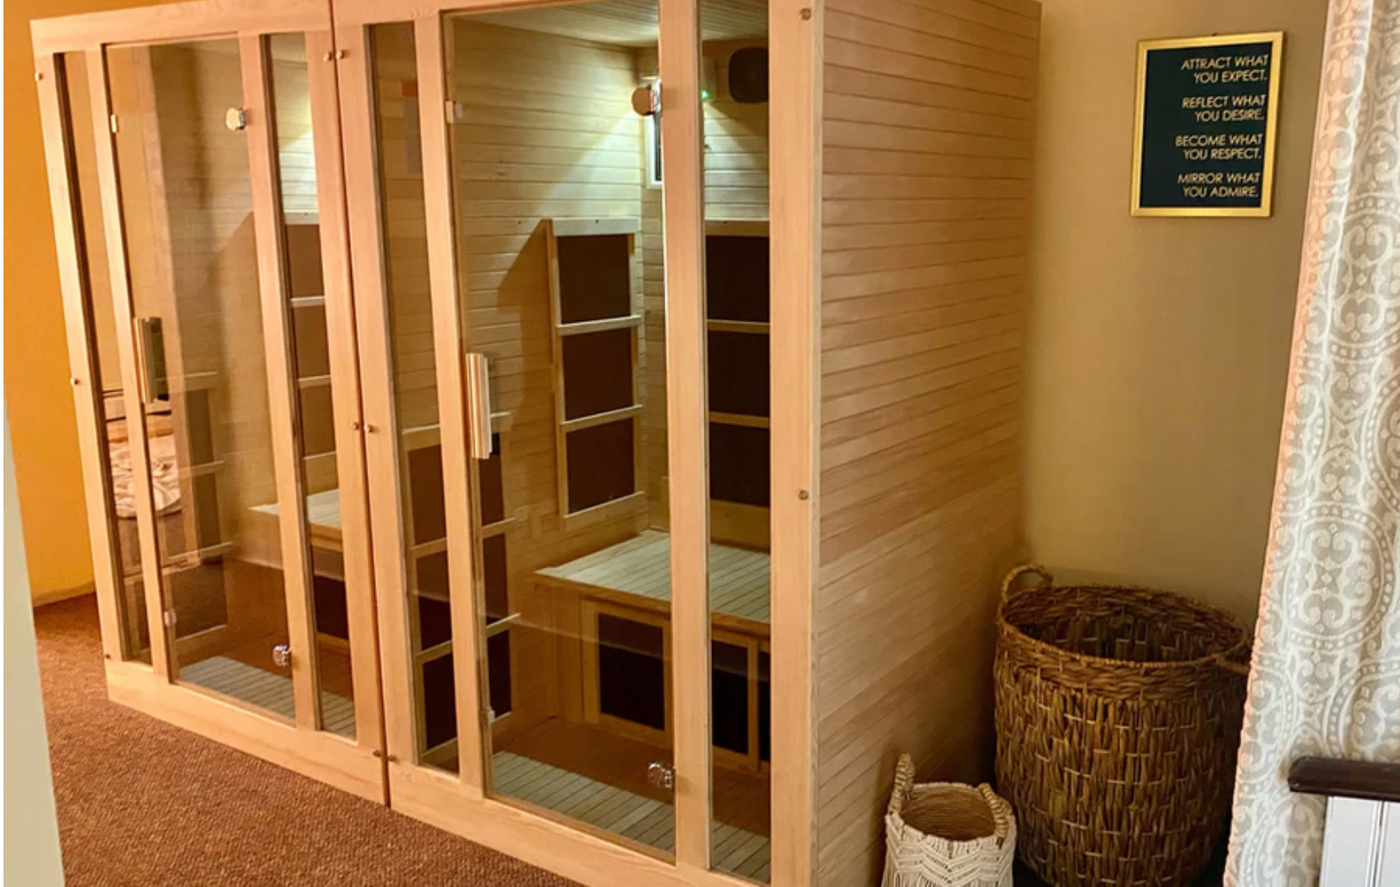 Buy 1 Sauna Session Get One FREE!